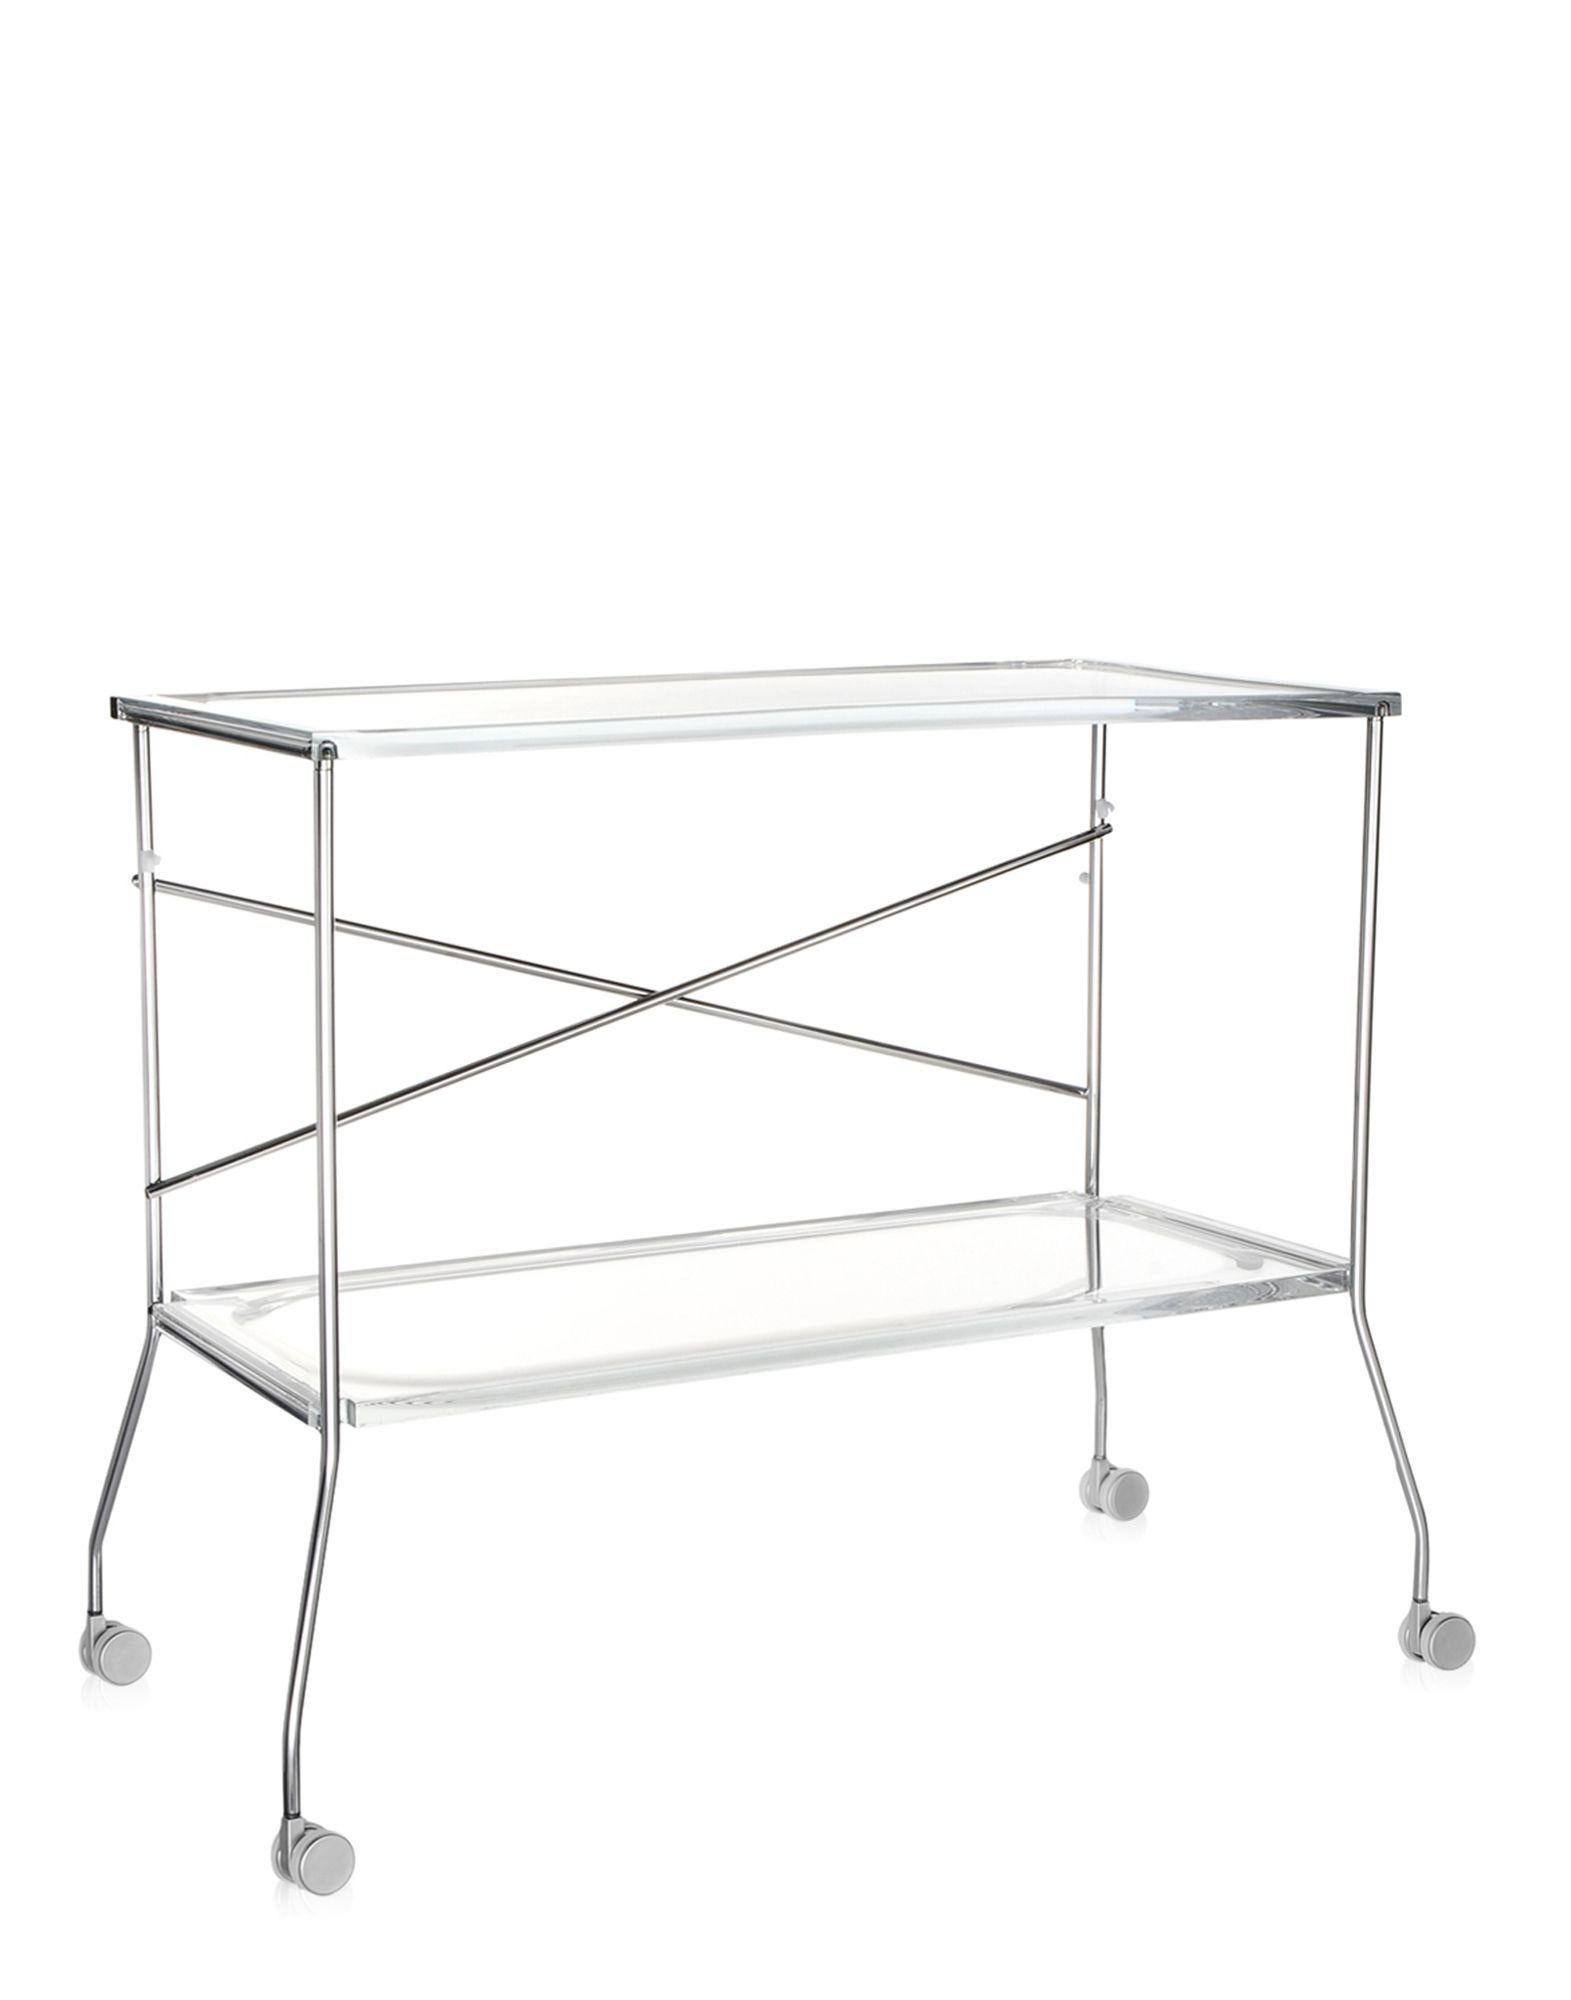 Kartell brings transparency to the world of trolleys too and thus we have flip, the folding trolley which combines the transparent plastic surfaces of the trays with a metal frame. The trays made of polymethylmethacrylate and can be used separately.